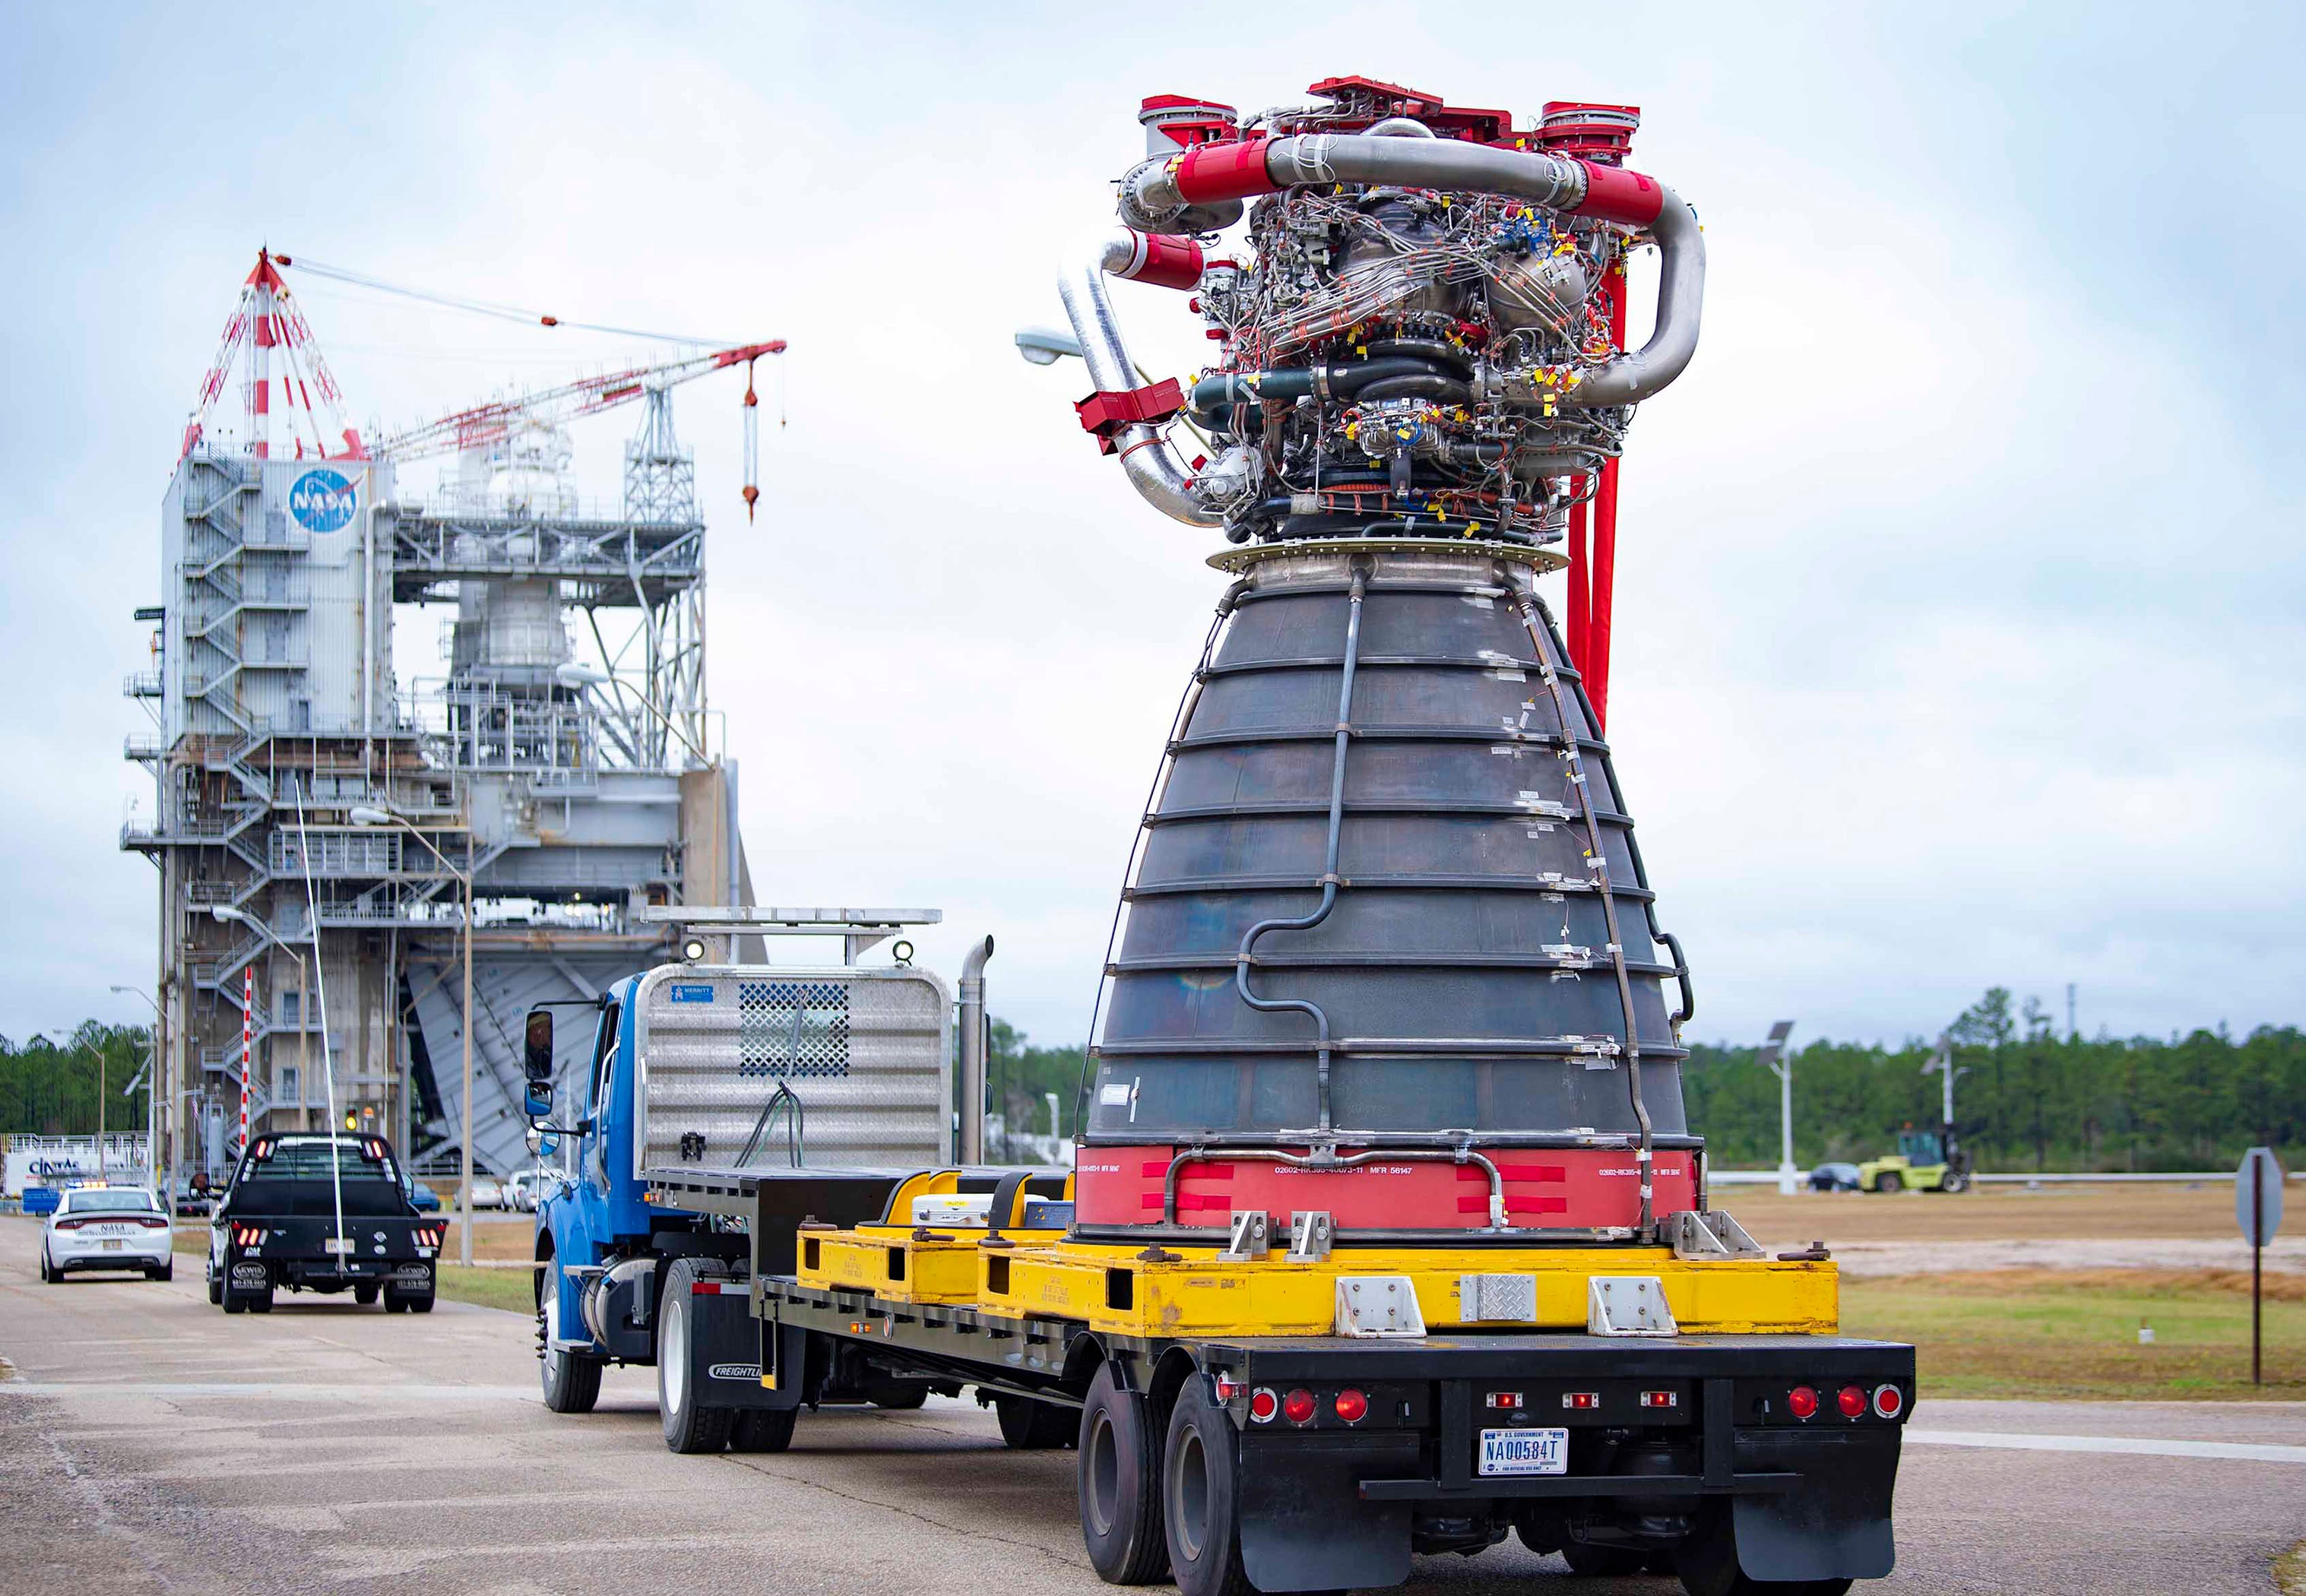 The engine, designated E10001, being delivered to the test stand at Stennis  (Photo: NASA/SSC)